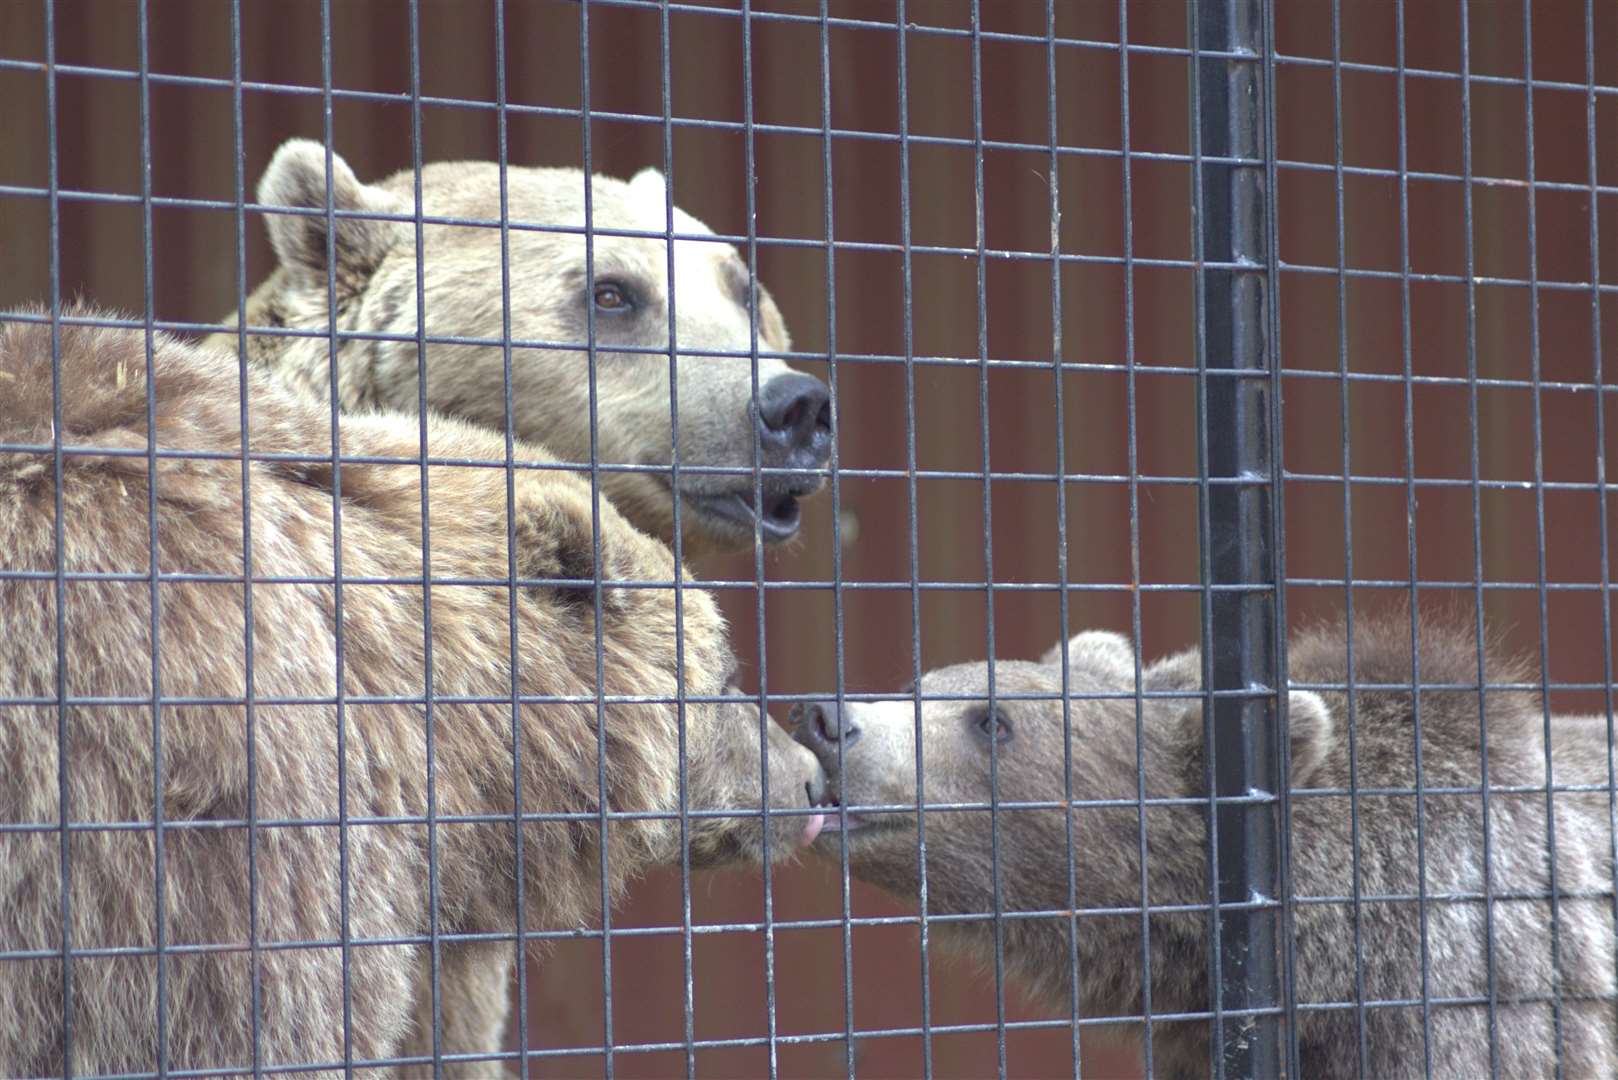 The family of European brown bears have now arrived at Port Lympne. All photos: Port Lympne